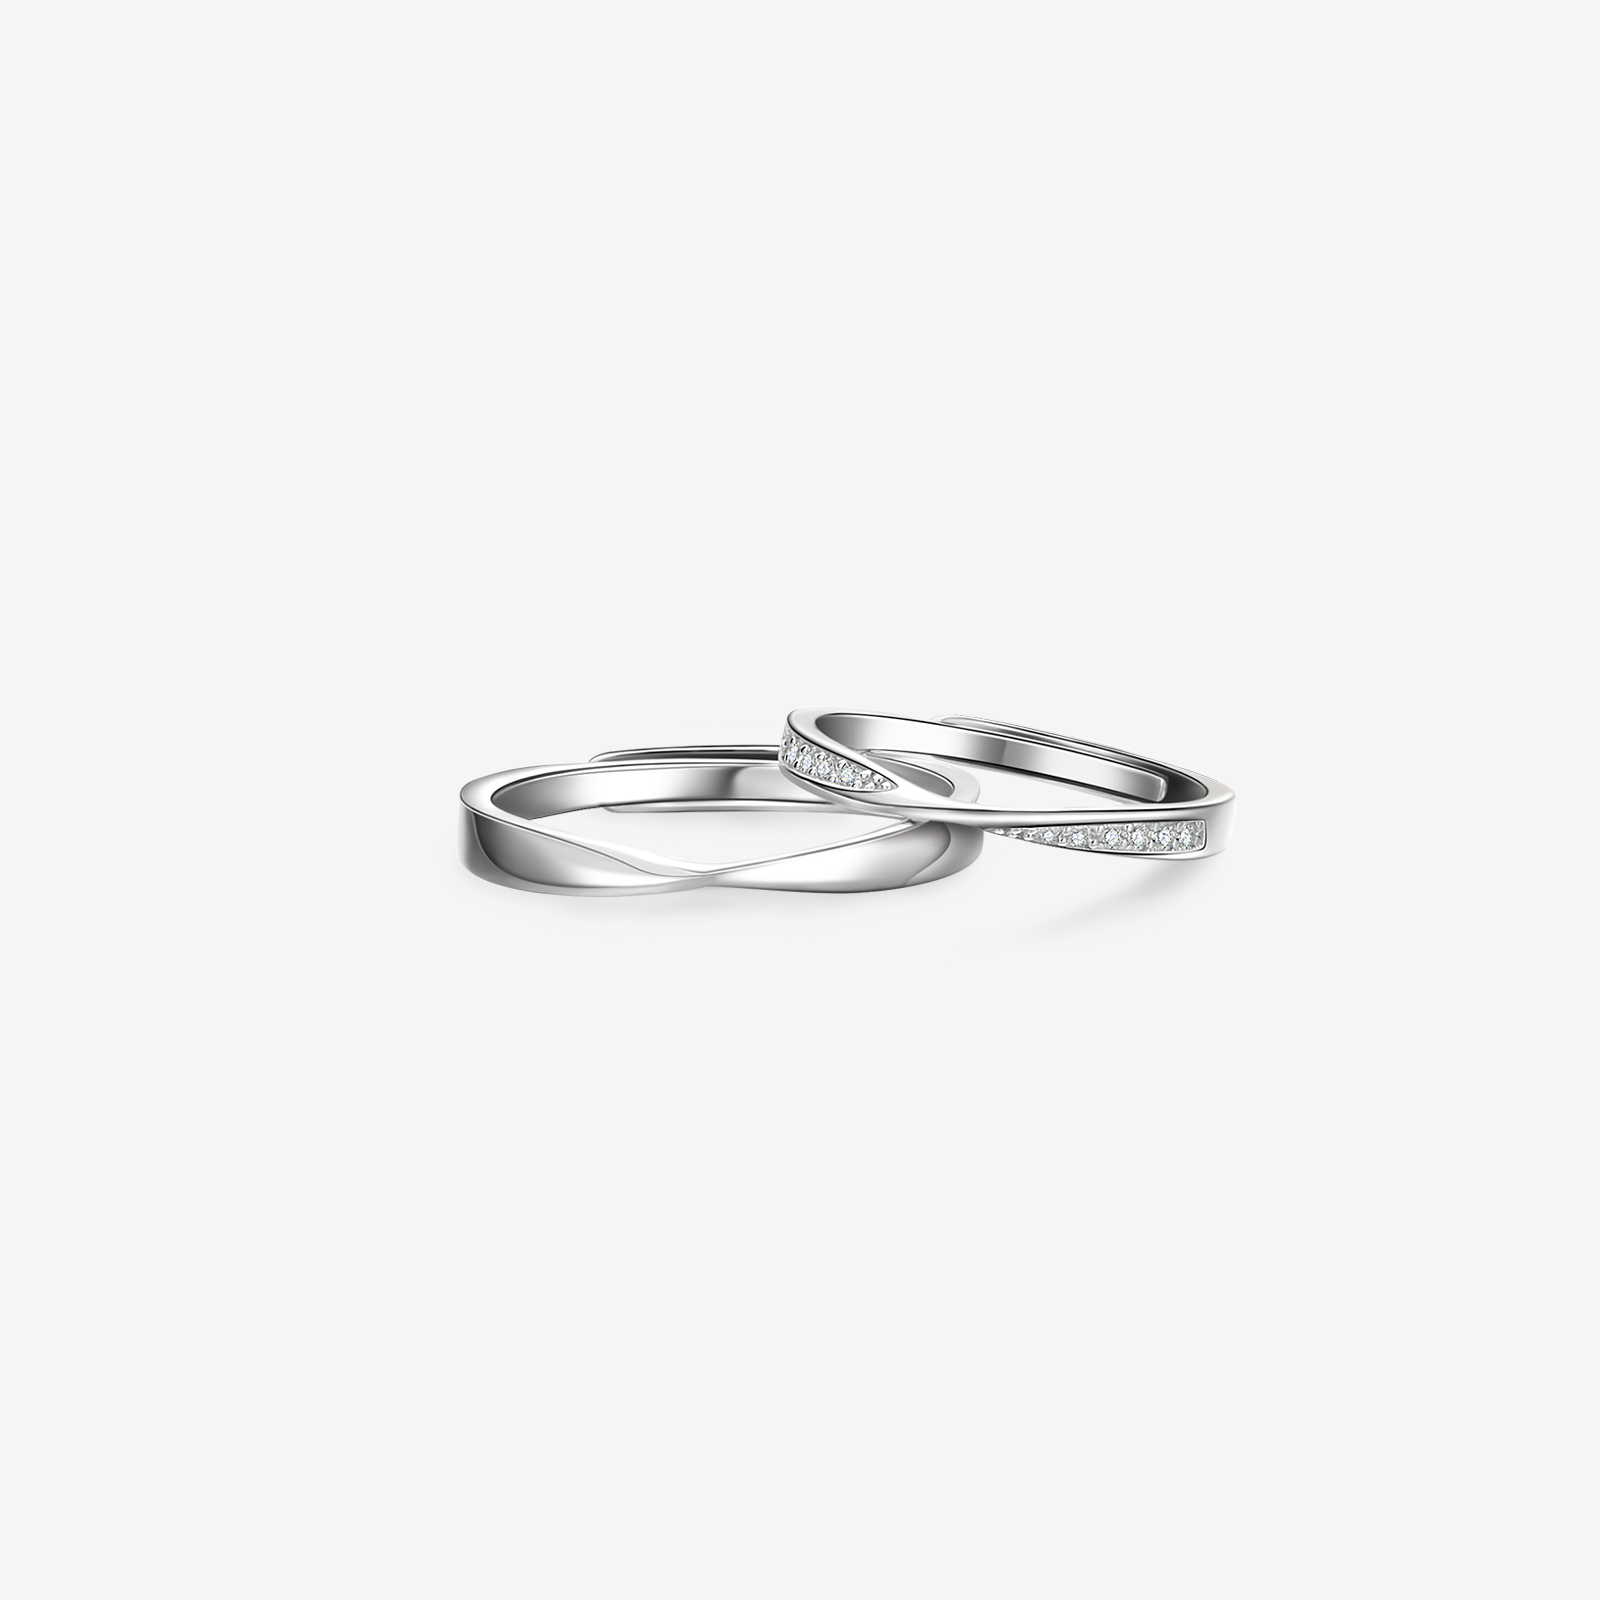 FANCIME "Connected" Couples Band Sterling Silver Rings Main